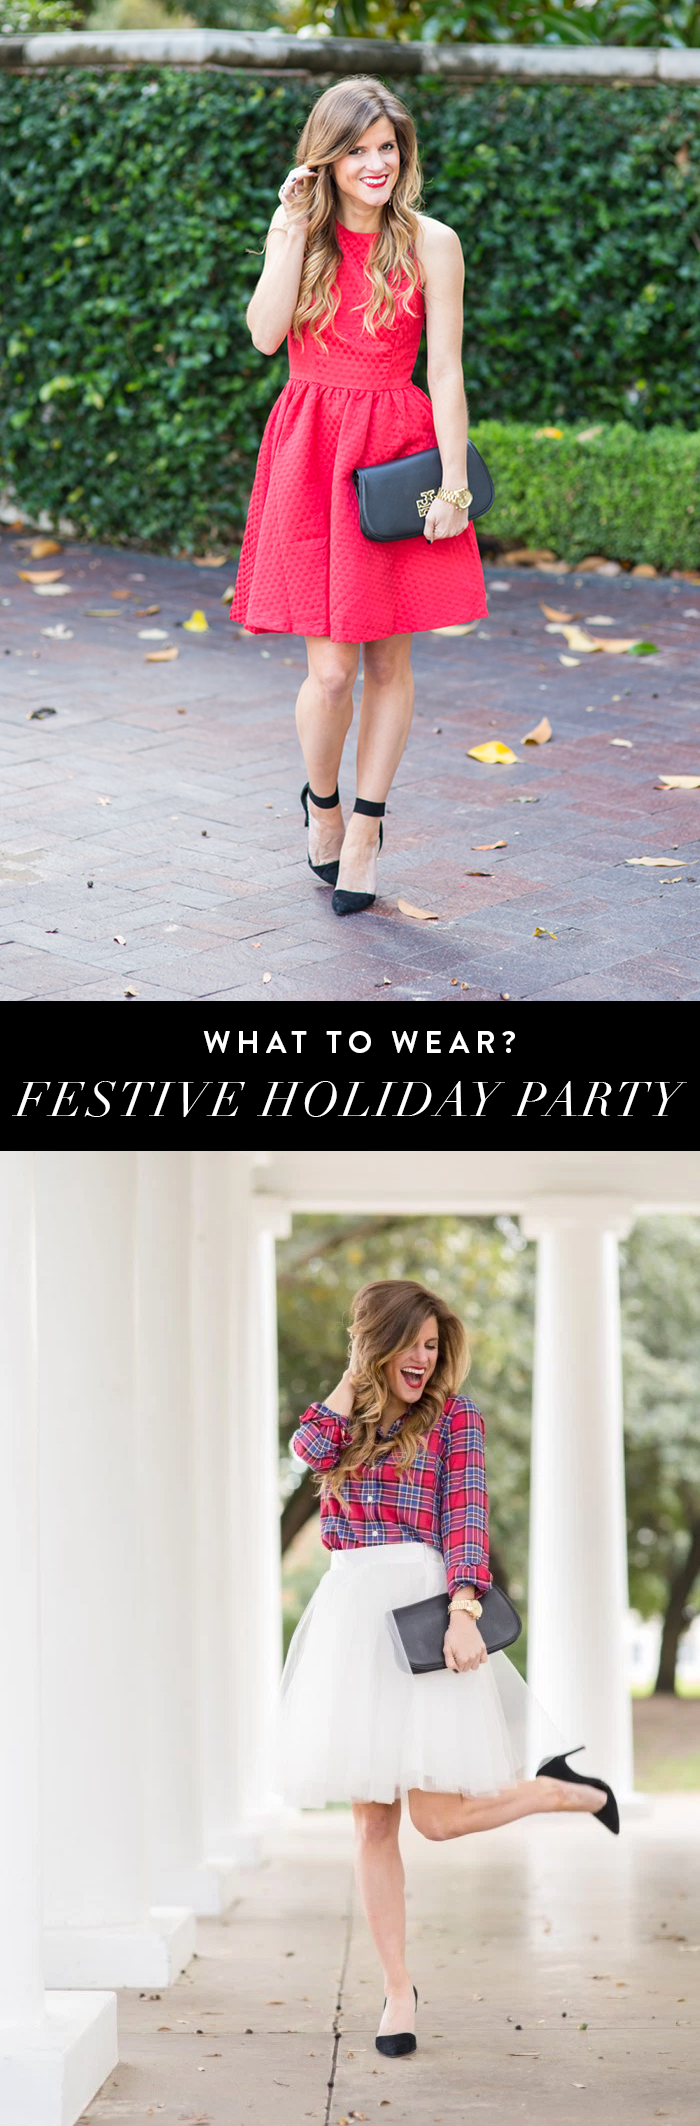 festive holiday party outfits